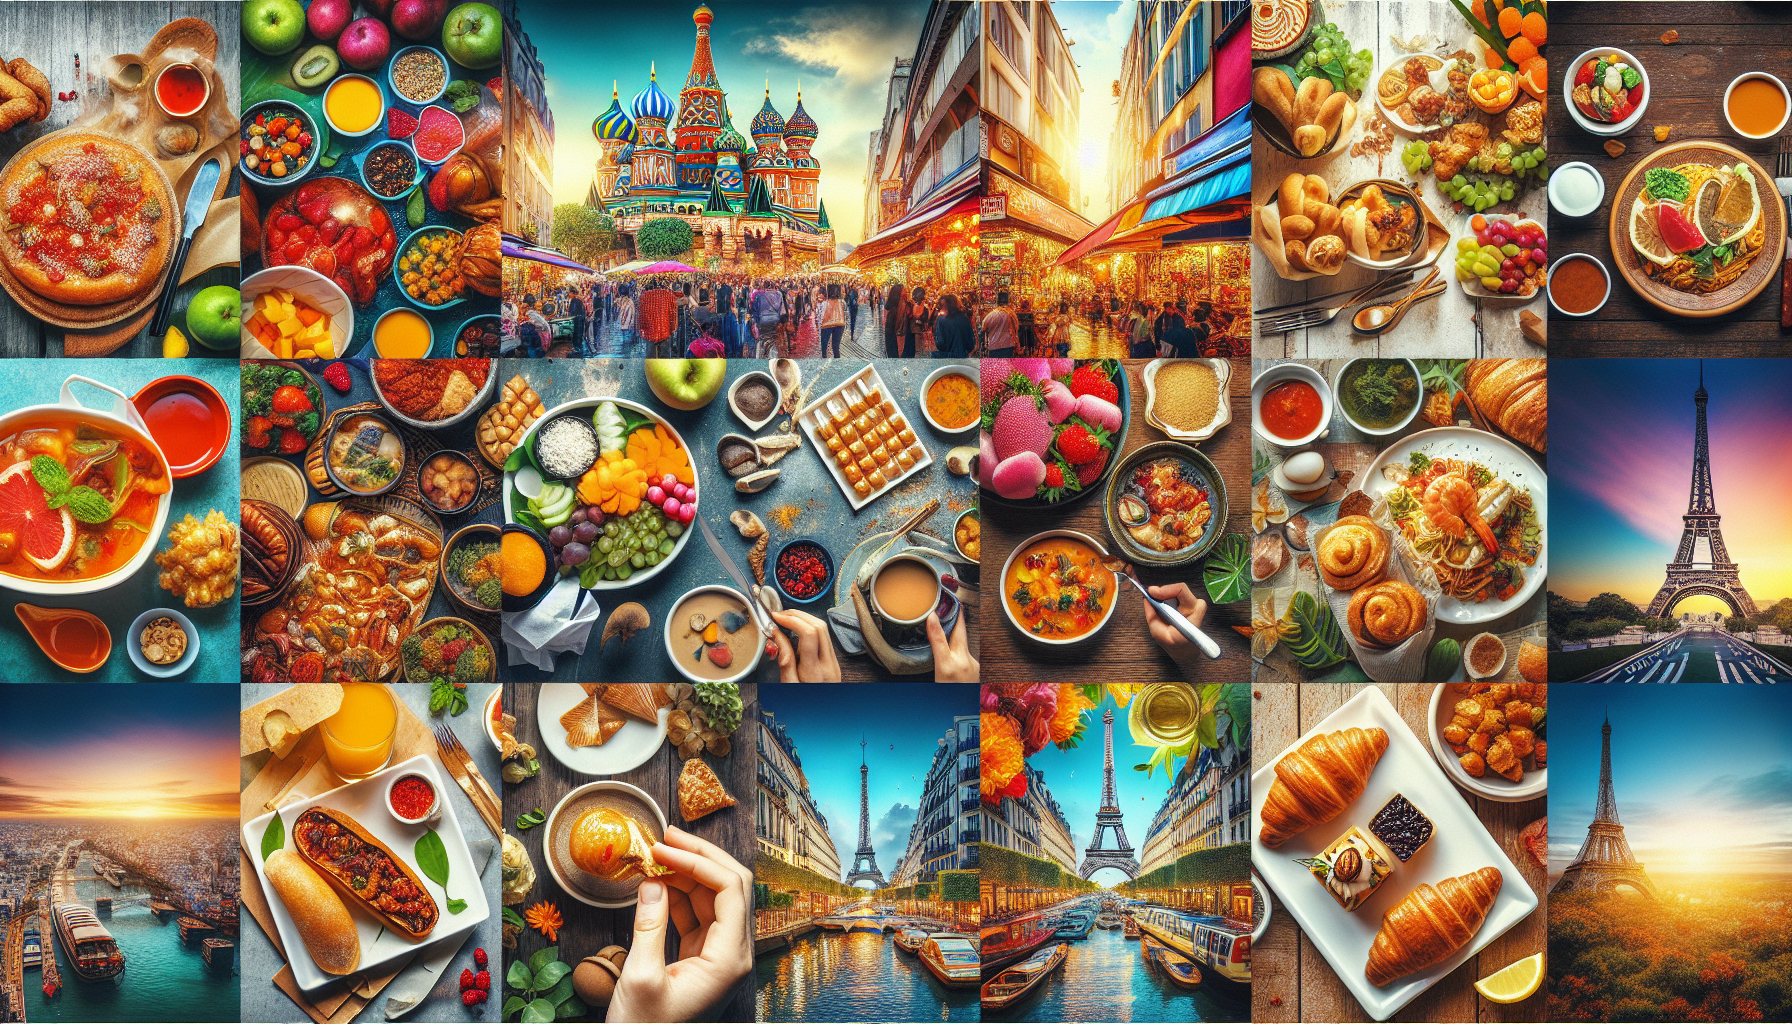 explore the top 10 most mouthwatering foodie destinations in the world and satisfy your cravings with new and exciting culinary experiences.